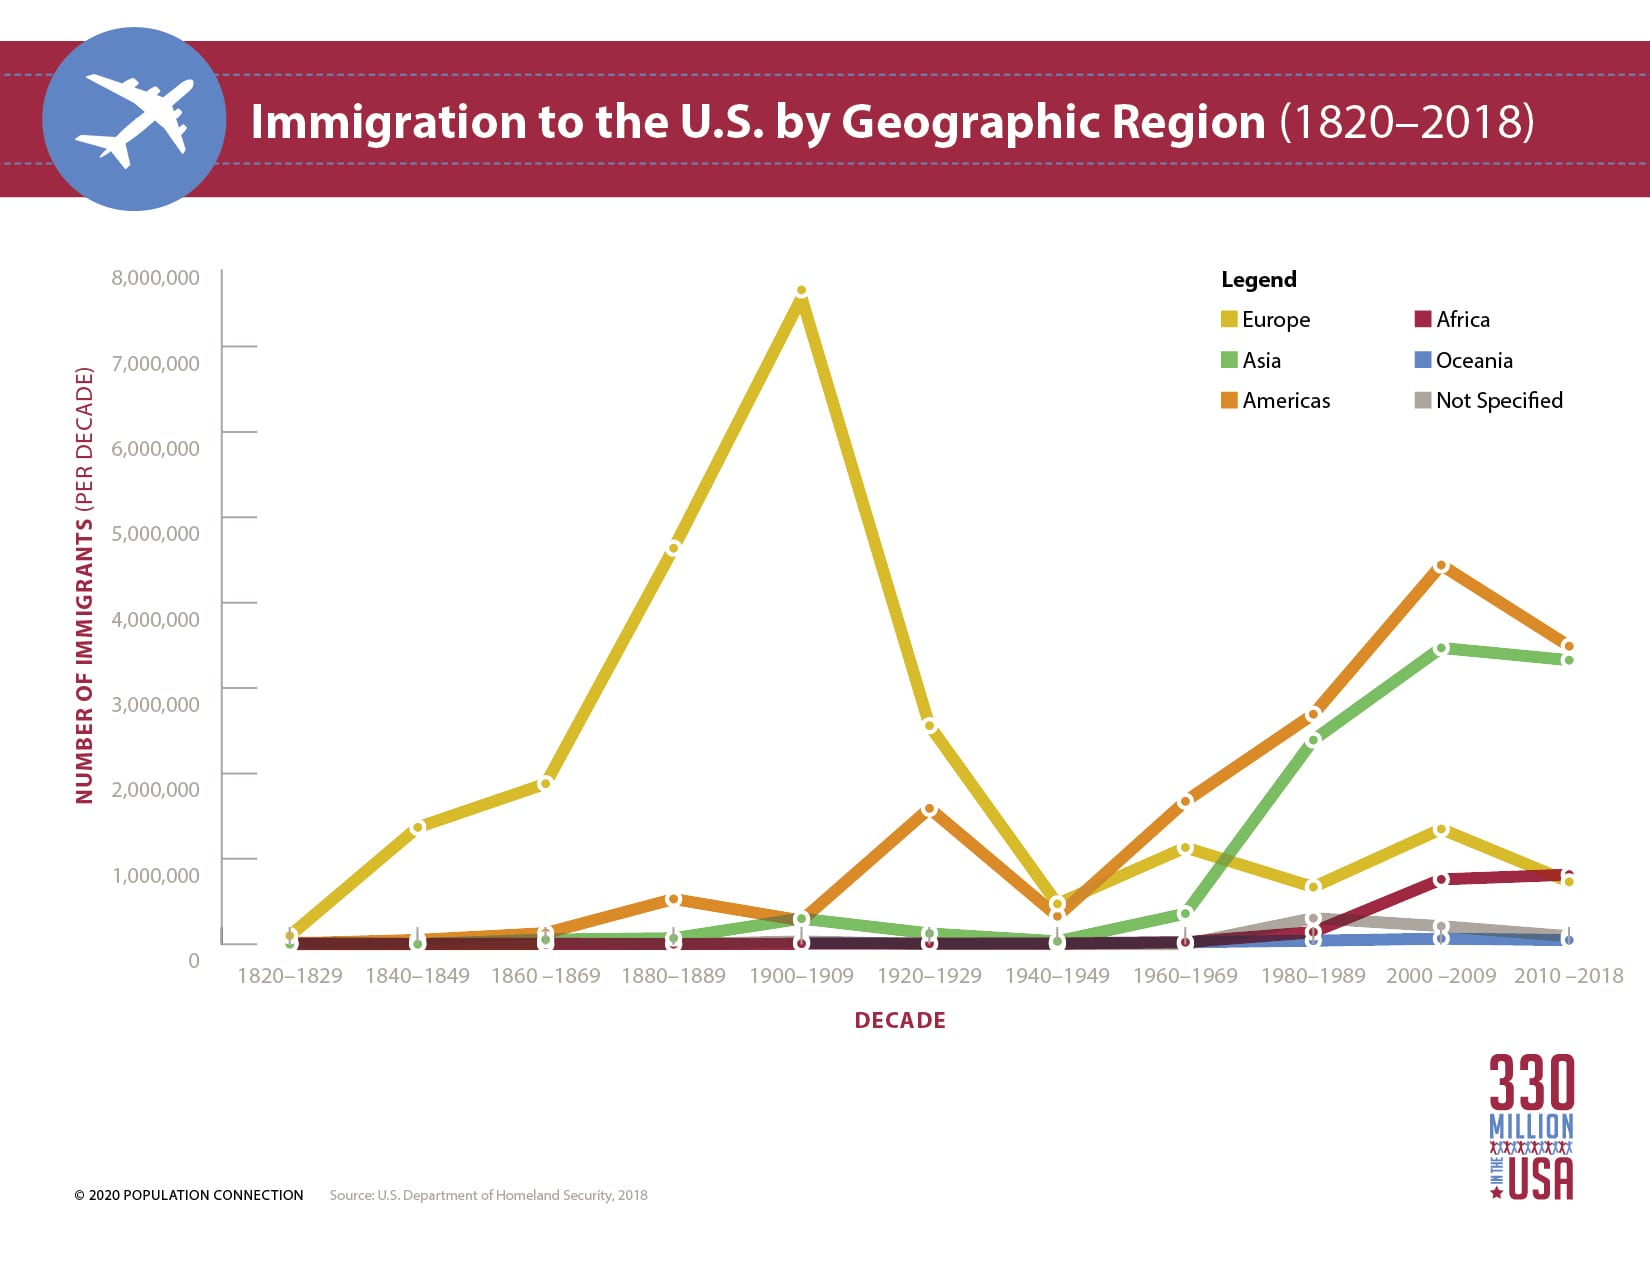 Line graph shows the number of immigrants to enter the U.S. over time, divided by their home geographic regions